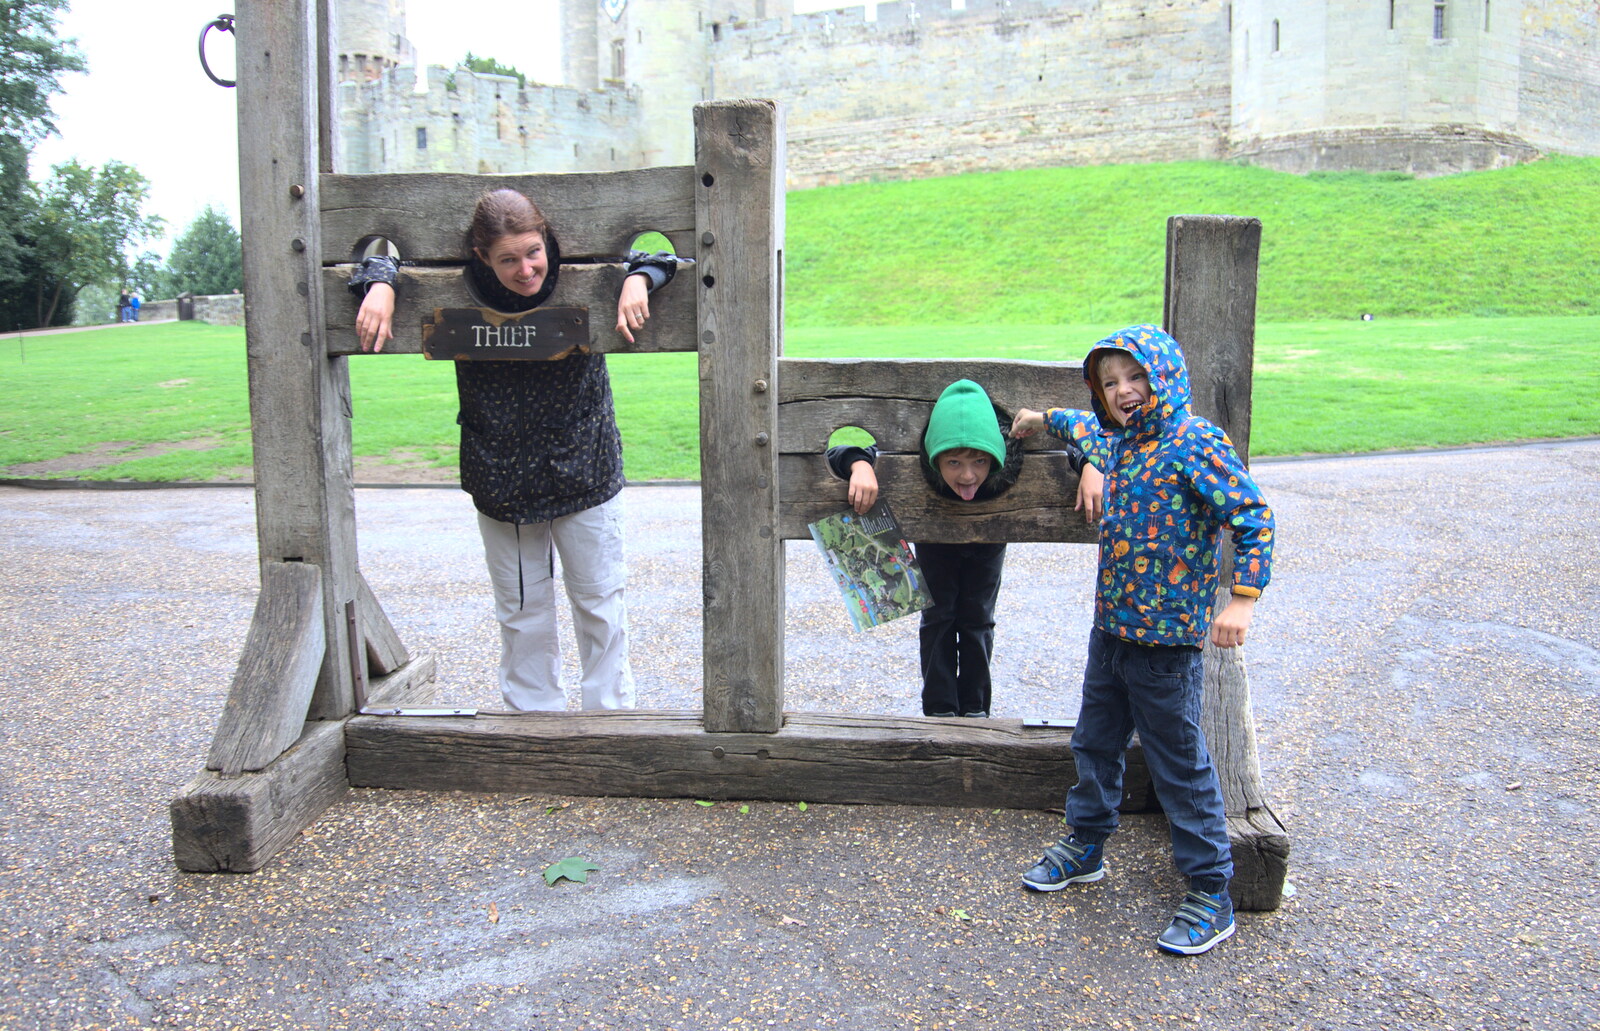 Isobel and Fred in the stocks again from A Day at Warwick Castle, Warwickshire - 8th September 2018